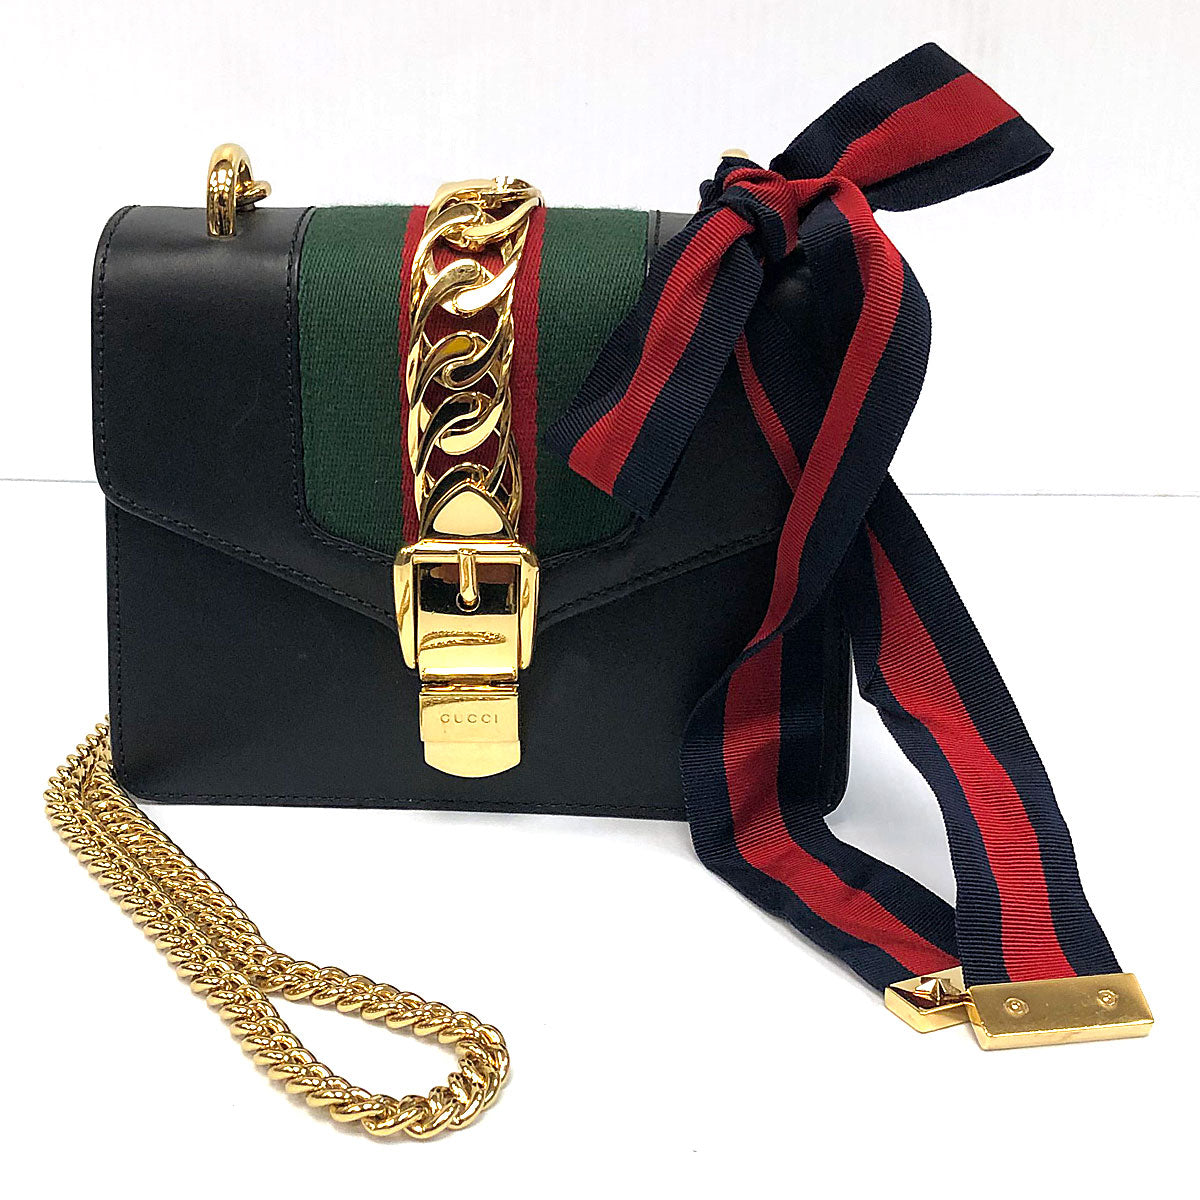 Pre-Owned Gucci Sylvie Chain Shoulder Bag Leather Mini, Rolland's Jewelers